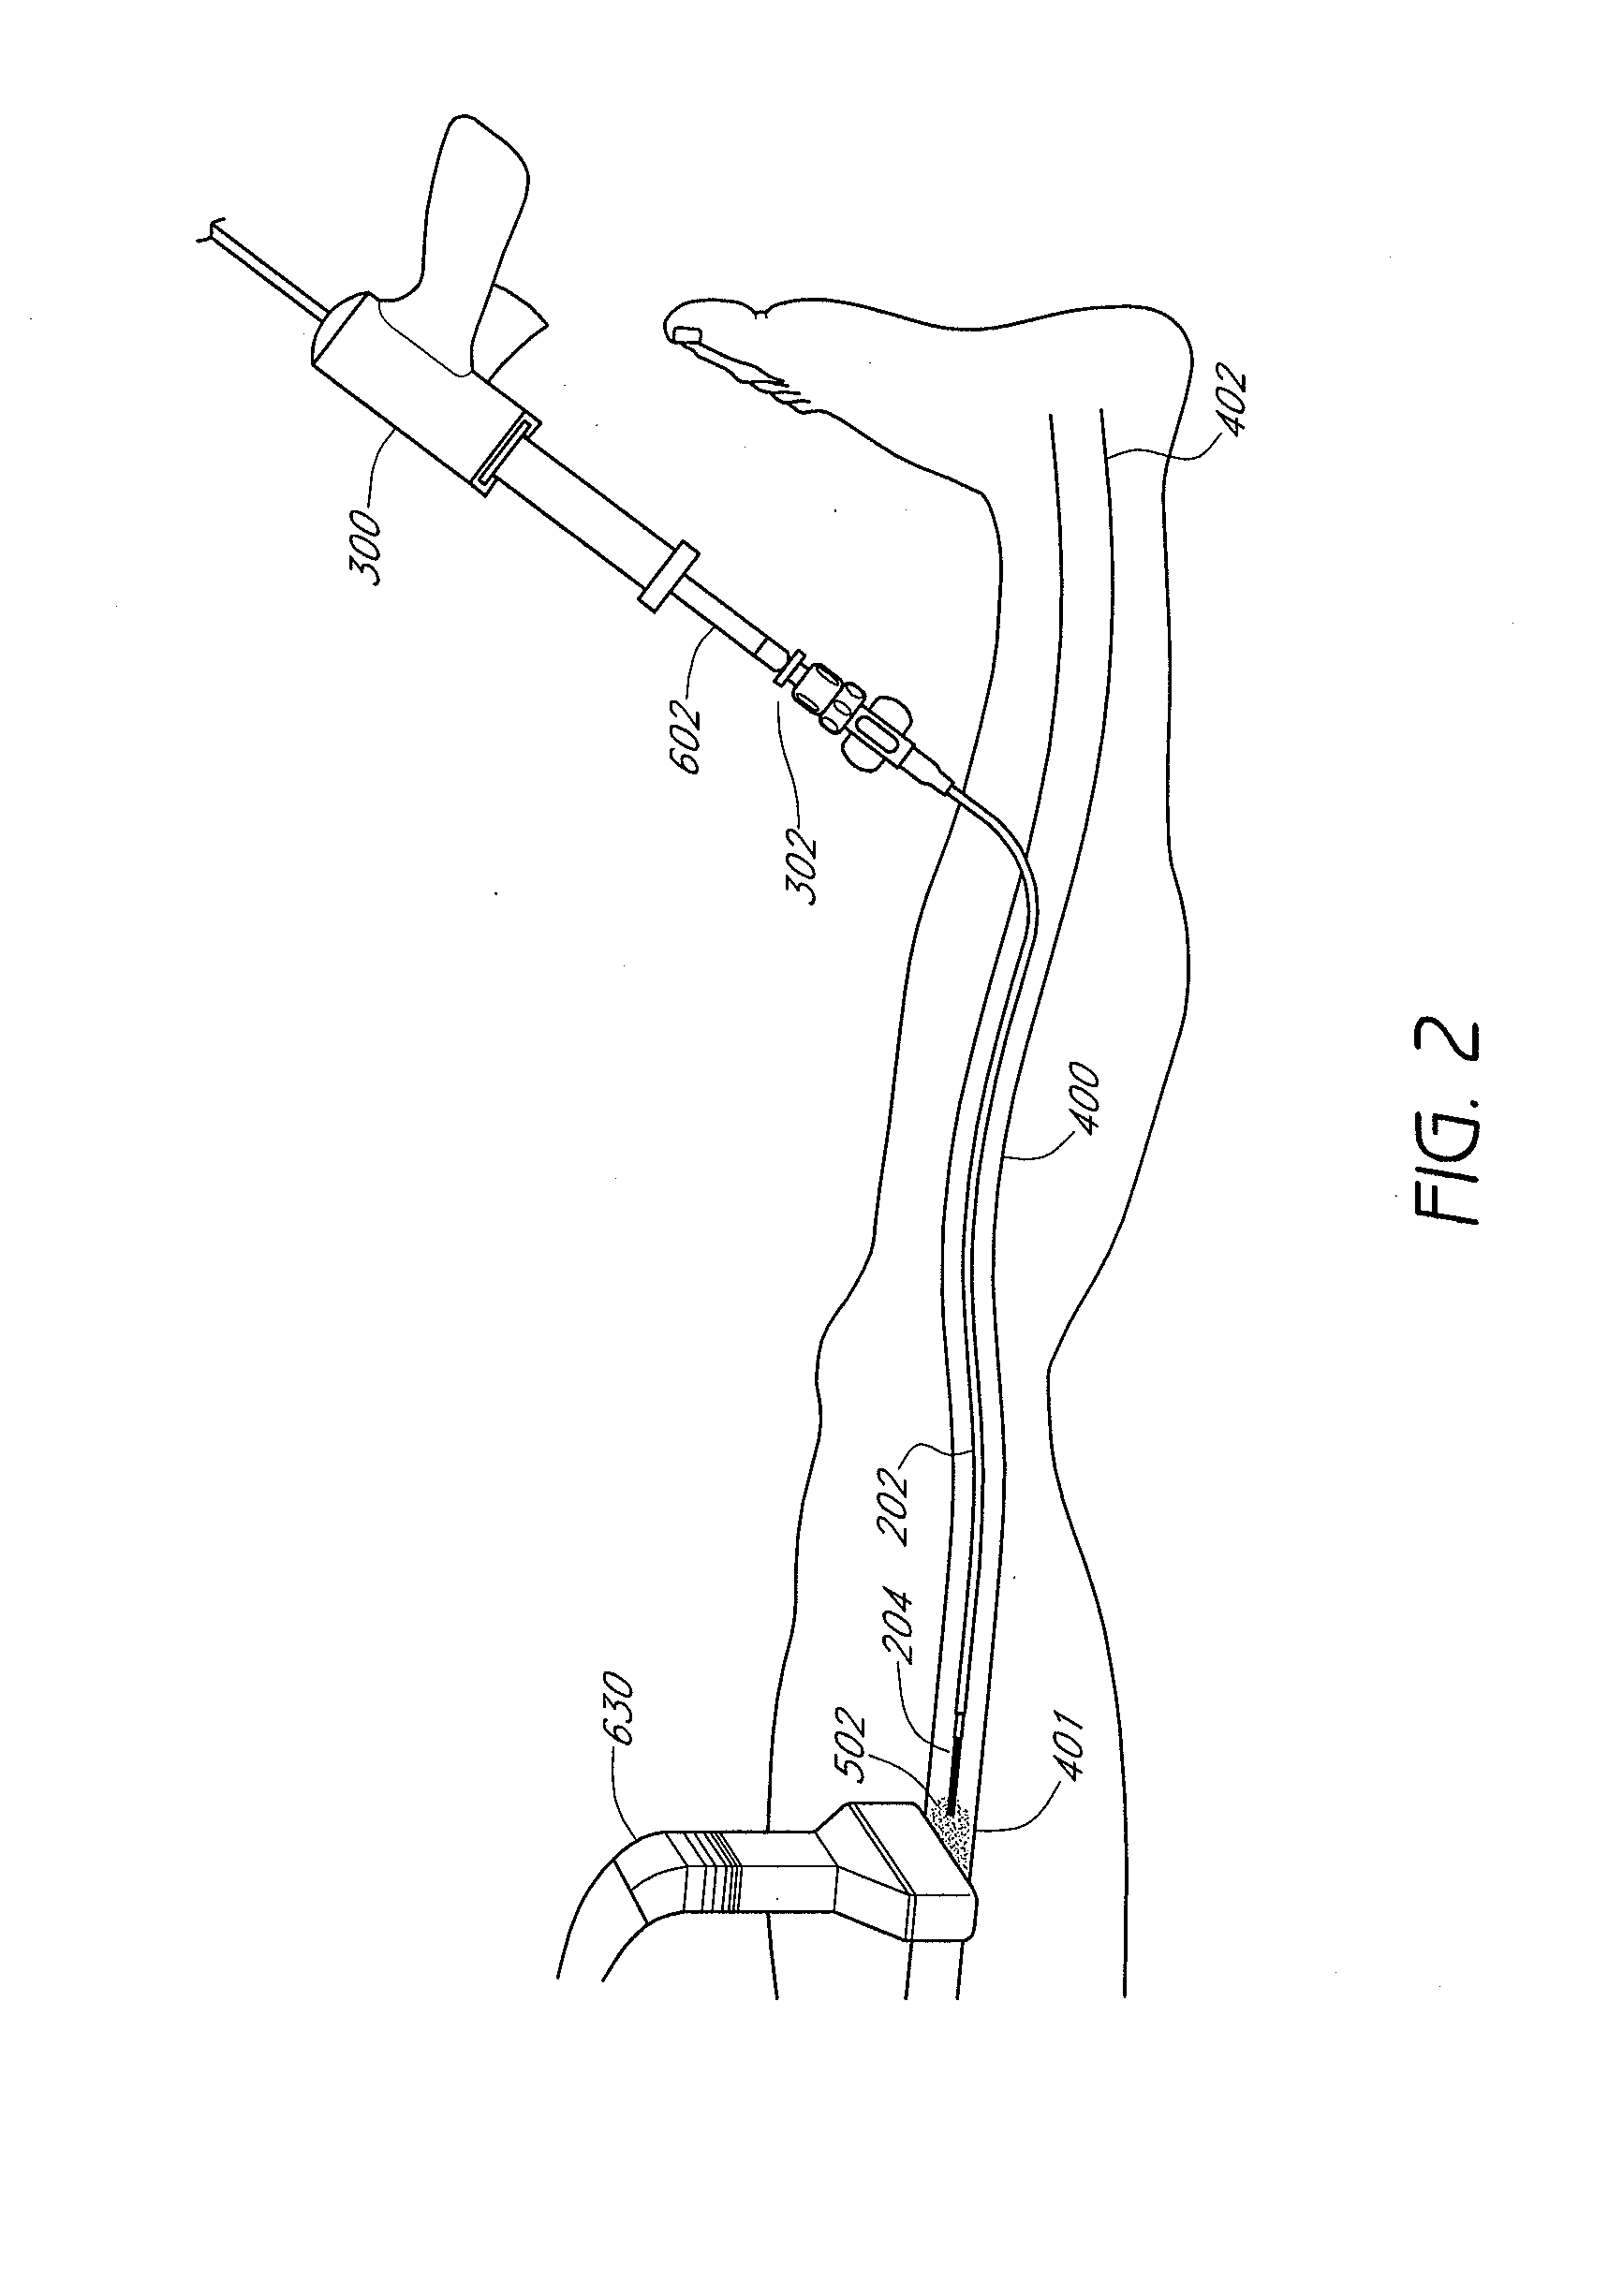 Systems and methods for treatment of perforator veins for venous insufficiency